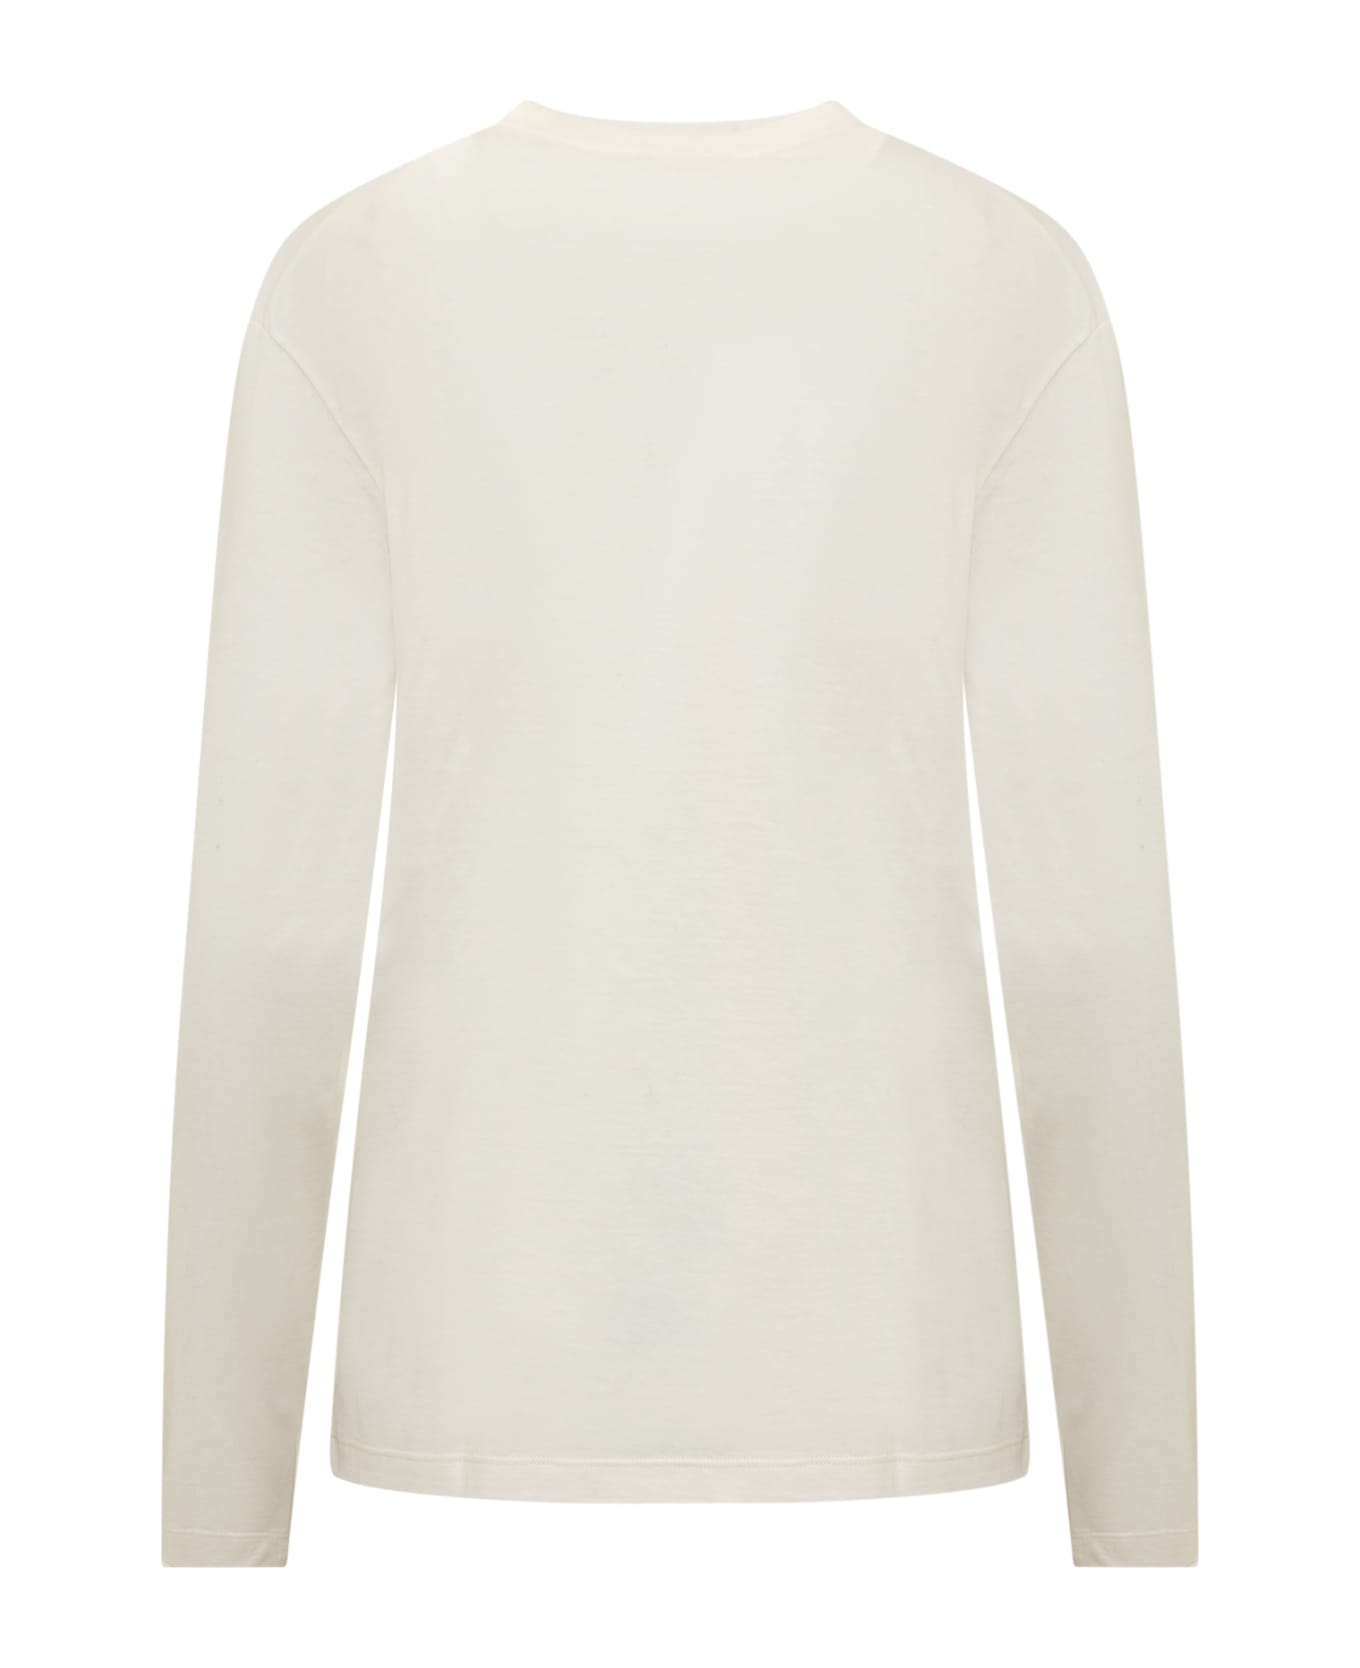 Jil Sander Cotton And Cashmere T-shirt - Ivory Tシャツ